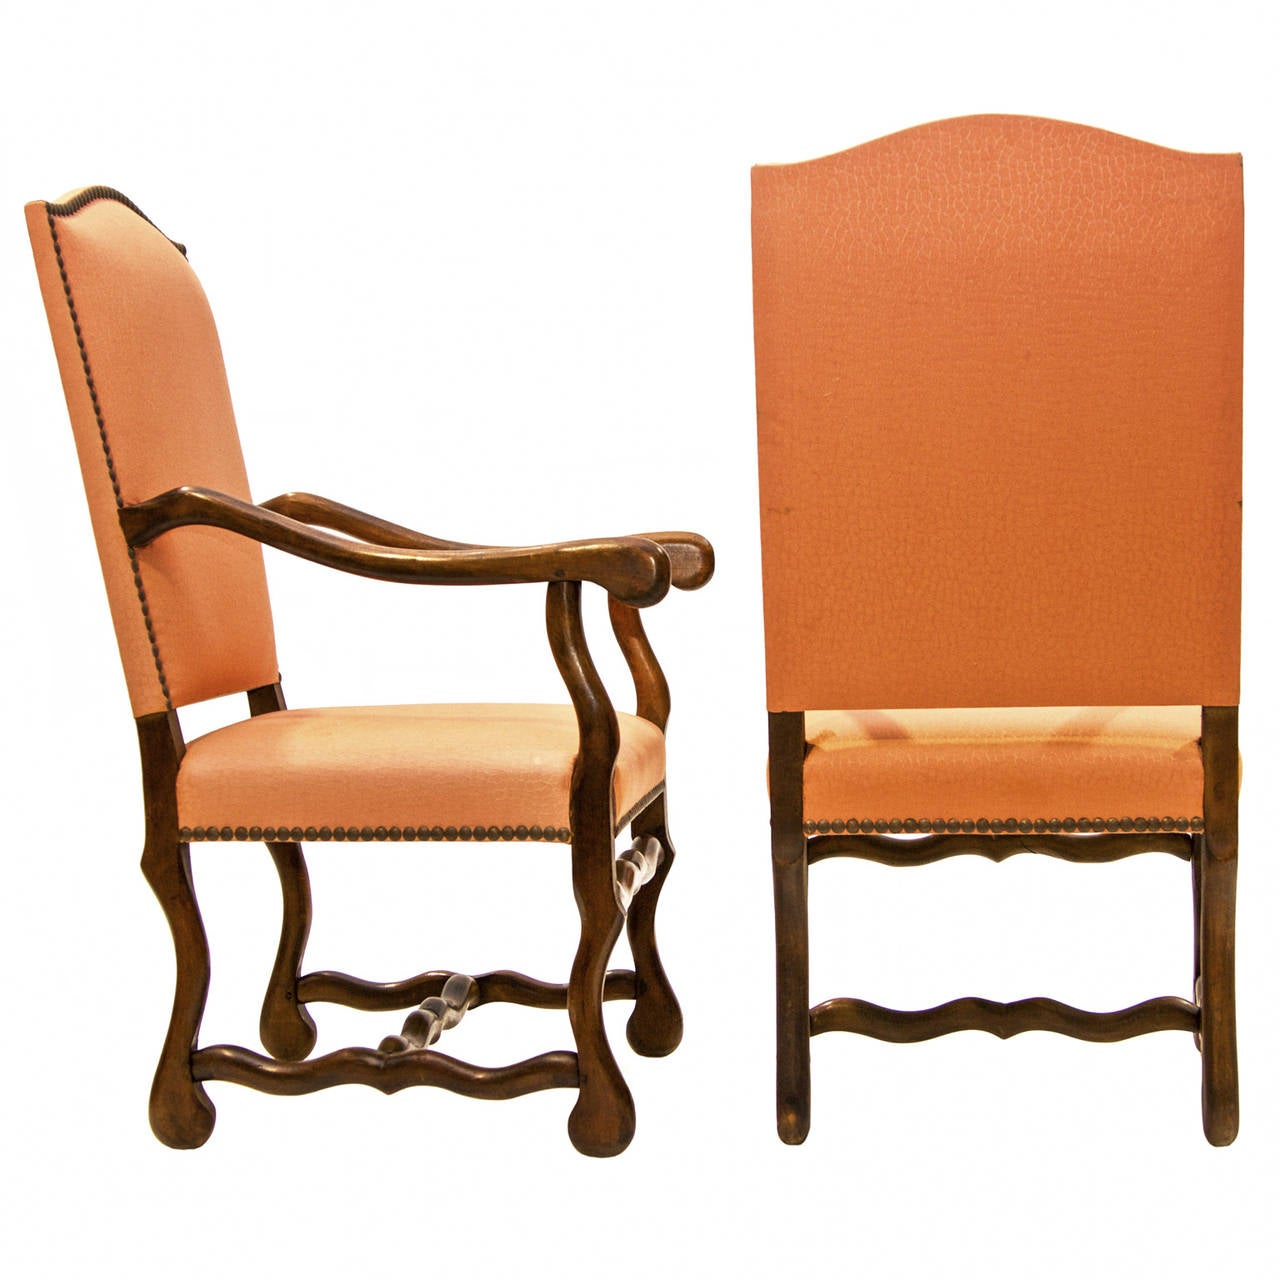 A fine and sturdy yet simple pair of Louis XIV style armchairs in the 